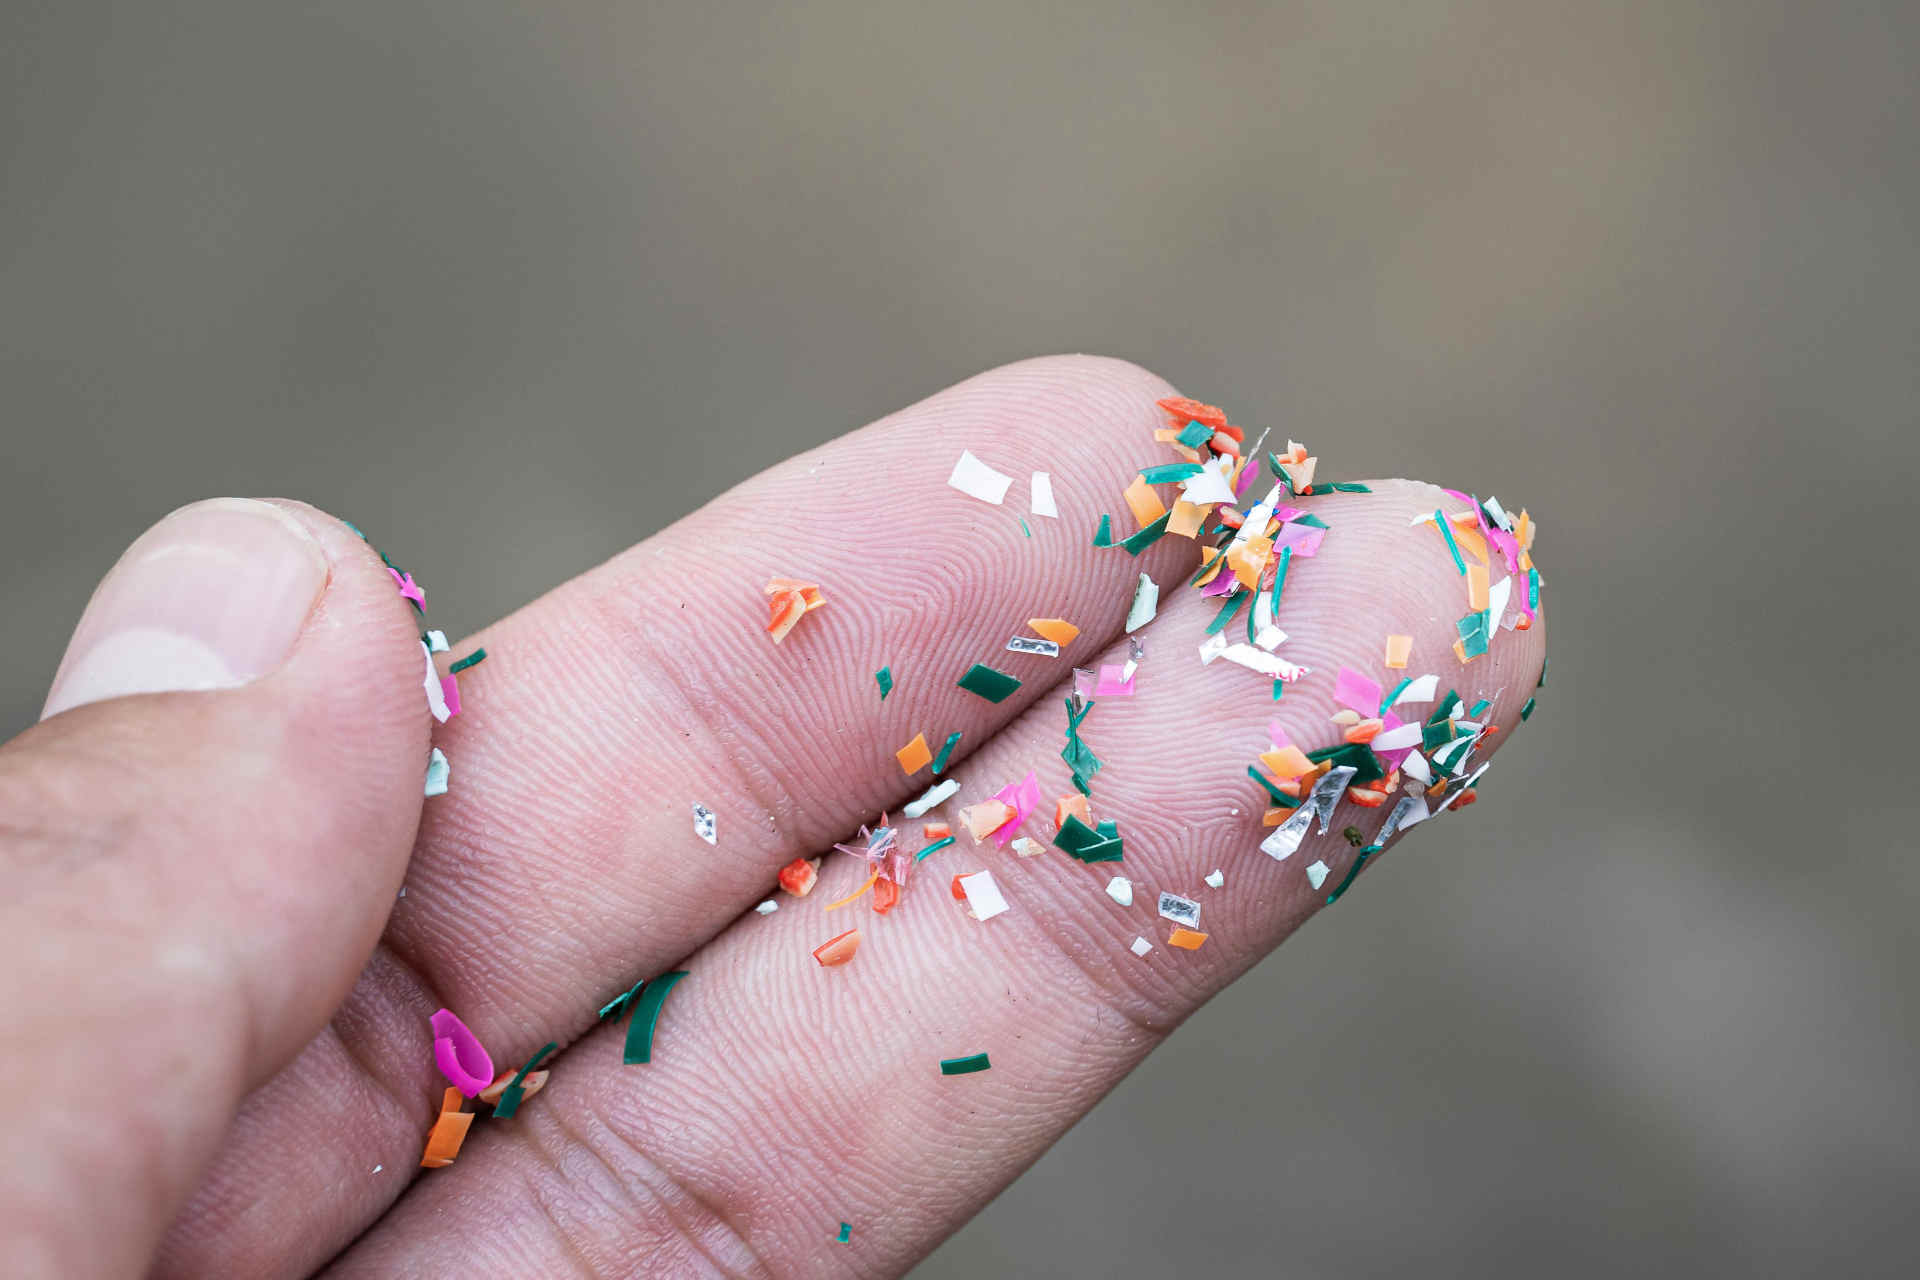 Microplastics from fabrics: the study that changes everything we know